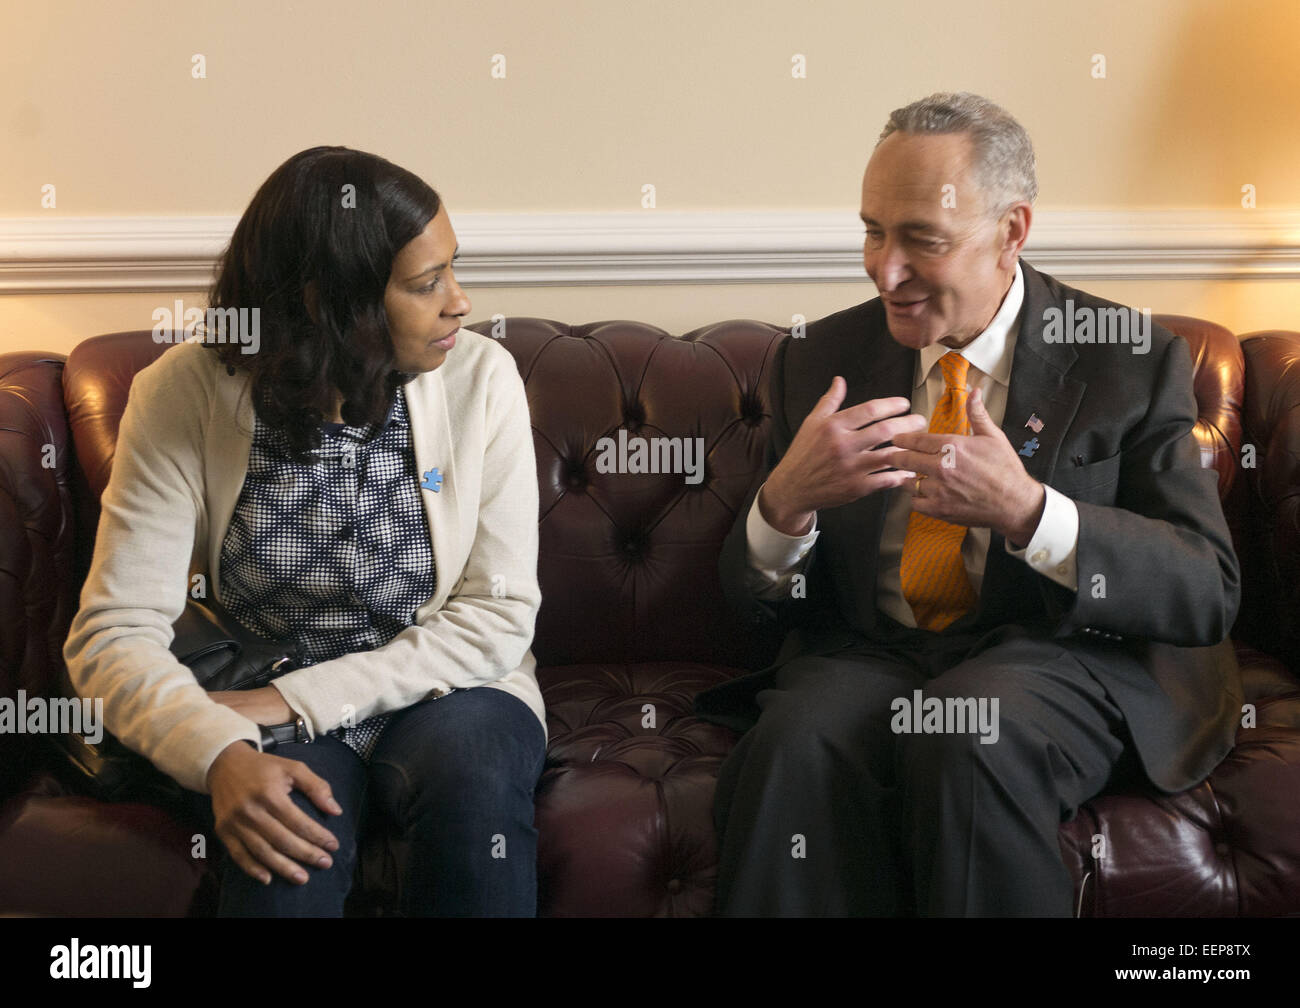 Jan. 20, 2015 - Washington, DC, UNITED STATES OF AMERICA - Senator Schumer and his State of the Union guest, Vanessa Fontaine, the mother of Avonte Oquendo posses for a picture today Tuesday 20 January 2014. In October 2013, Avonte Oquendo, a 14-year-old boy with a diagnosis of Autism Spectrum Disorder, bolted from his school in Queens. Authorities and volunteers searched for Avonte for more than three months, until his remains were tragically discovered on January 16th in College Point, Queens. Senator Schumer has introduced Avonte's Law to create and fund a program to provide voluntary tra Stock Photo